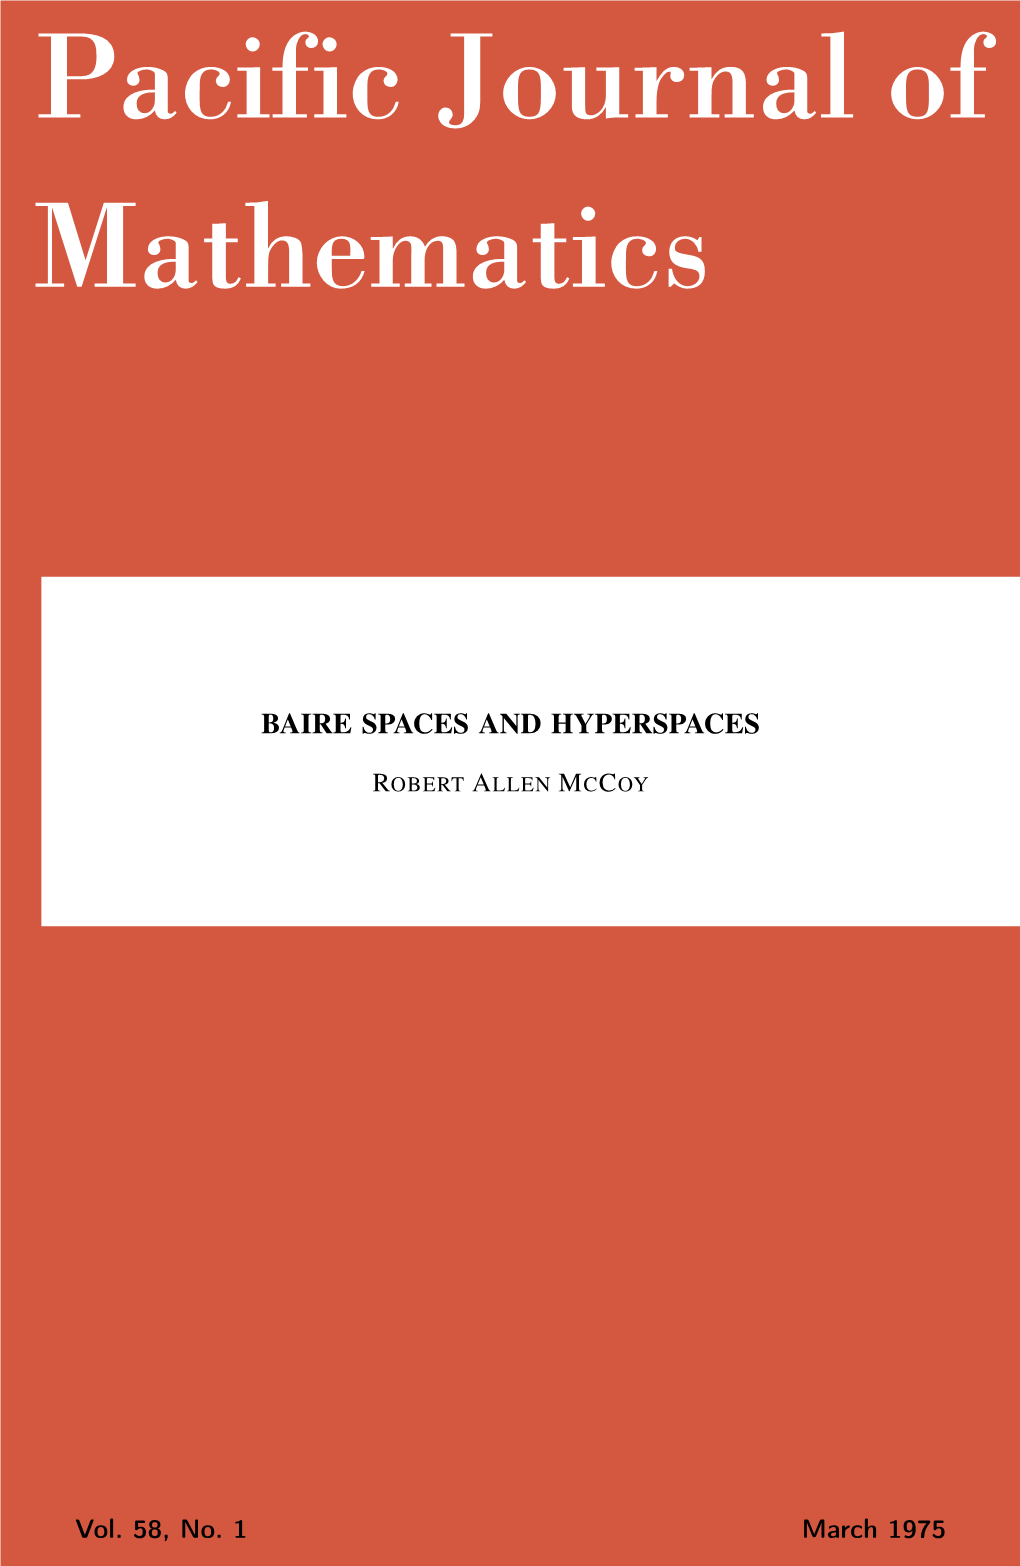 Baire Spaces and Hyperspaces